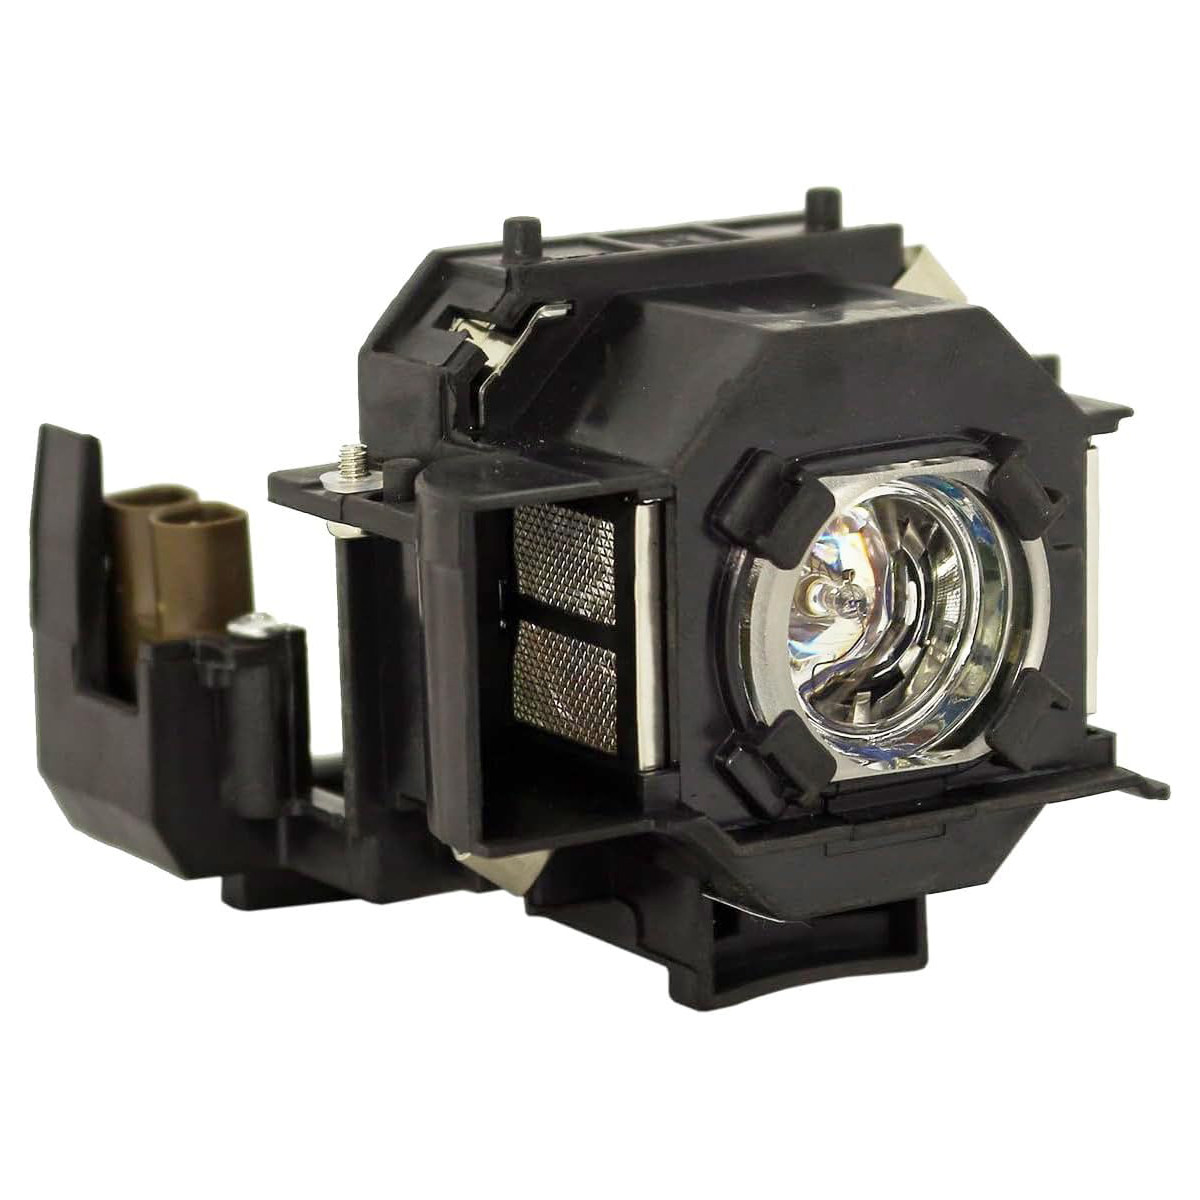 Replacement Projector lamp ELPLP33 For Epson EMP-S3 EMP-S3L EMP-TW20 EMP-TW20H